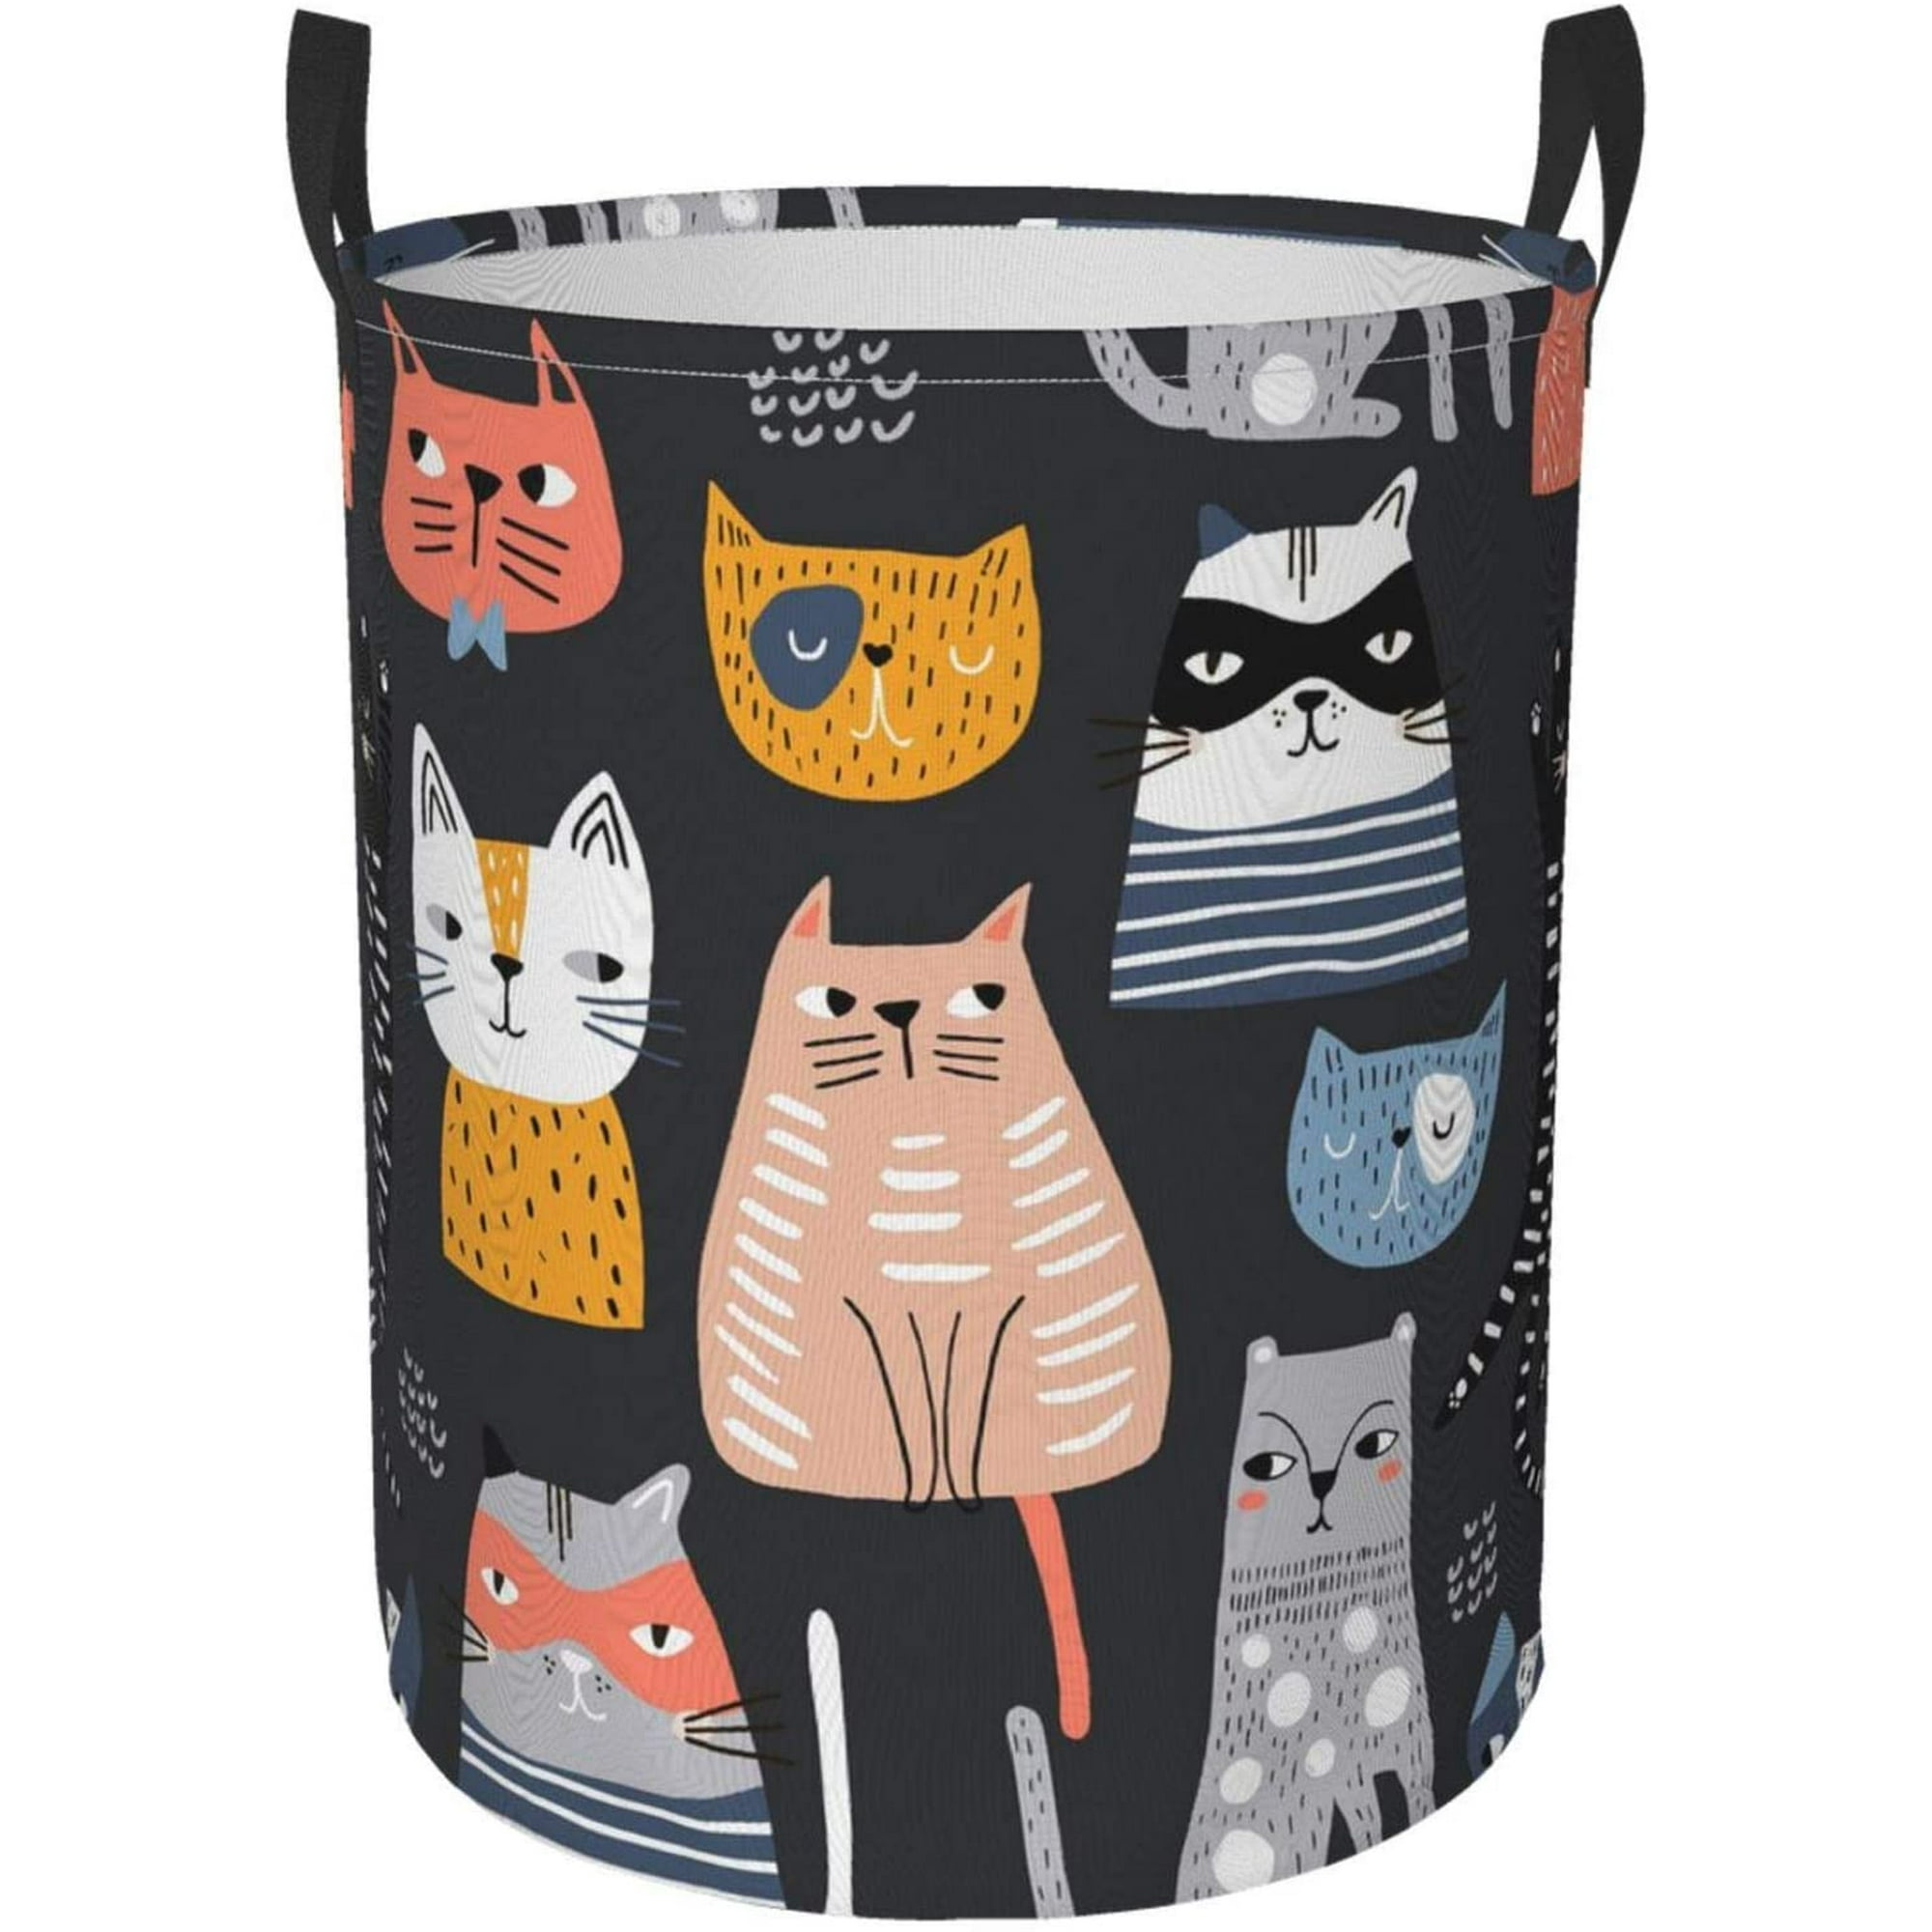 Funny Cats Collapsible Laundry Hamper, Large Laundry Basket, Waterproof Laundry  Bag, Storage Washing Dirty Clothes and Toys with Handles | Walmart Canada